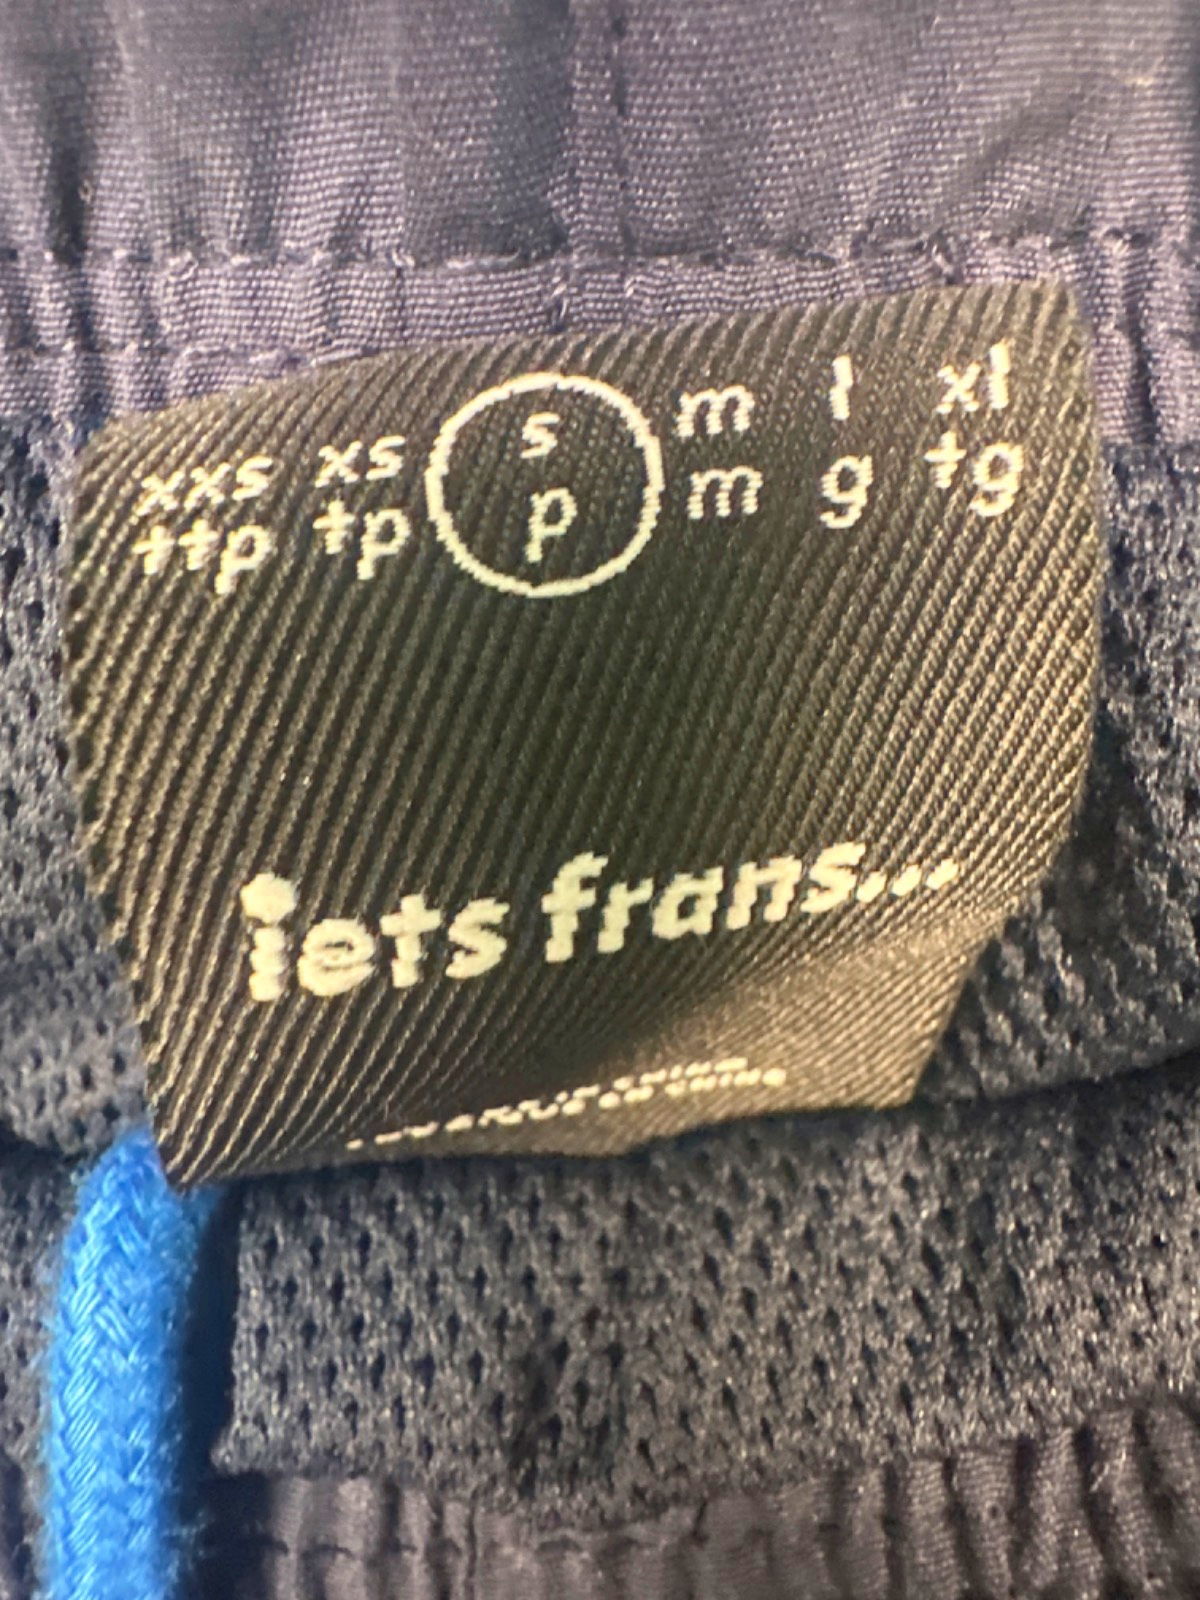 iets frans Navy Blue Track Pants Small